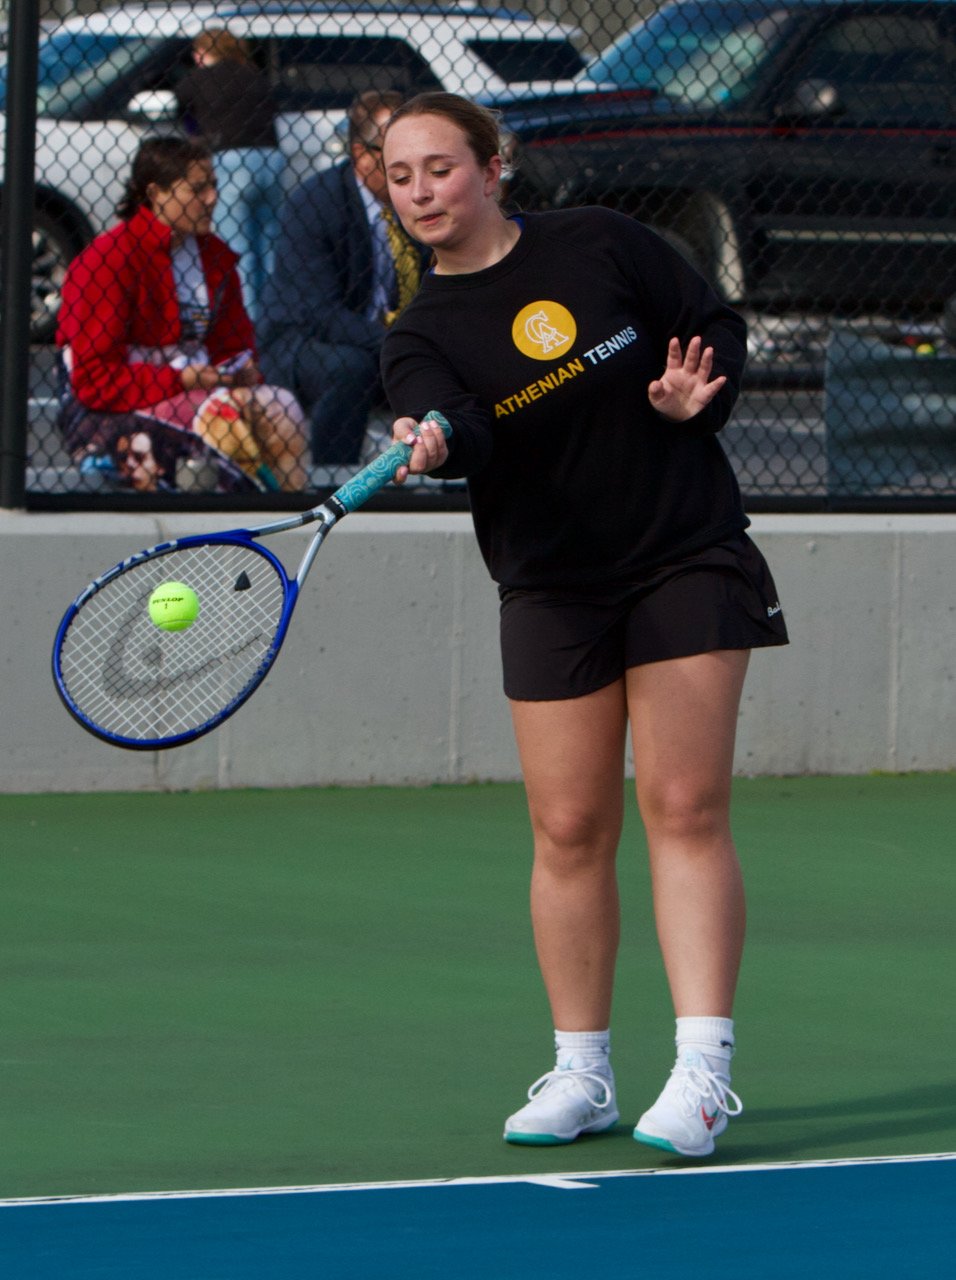 Samantha Rohr was victorious at No. 1 singles for the Athenians.